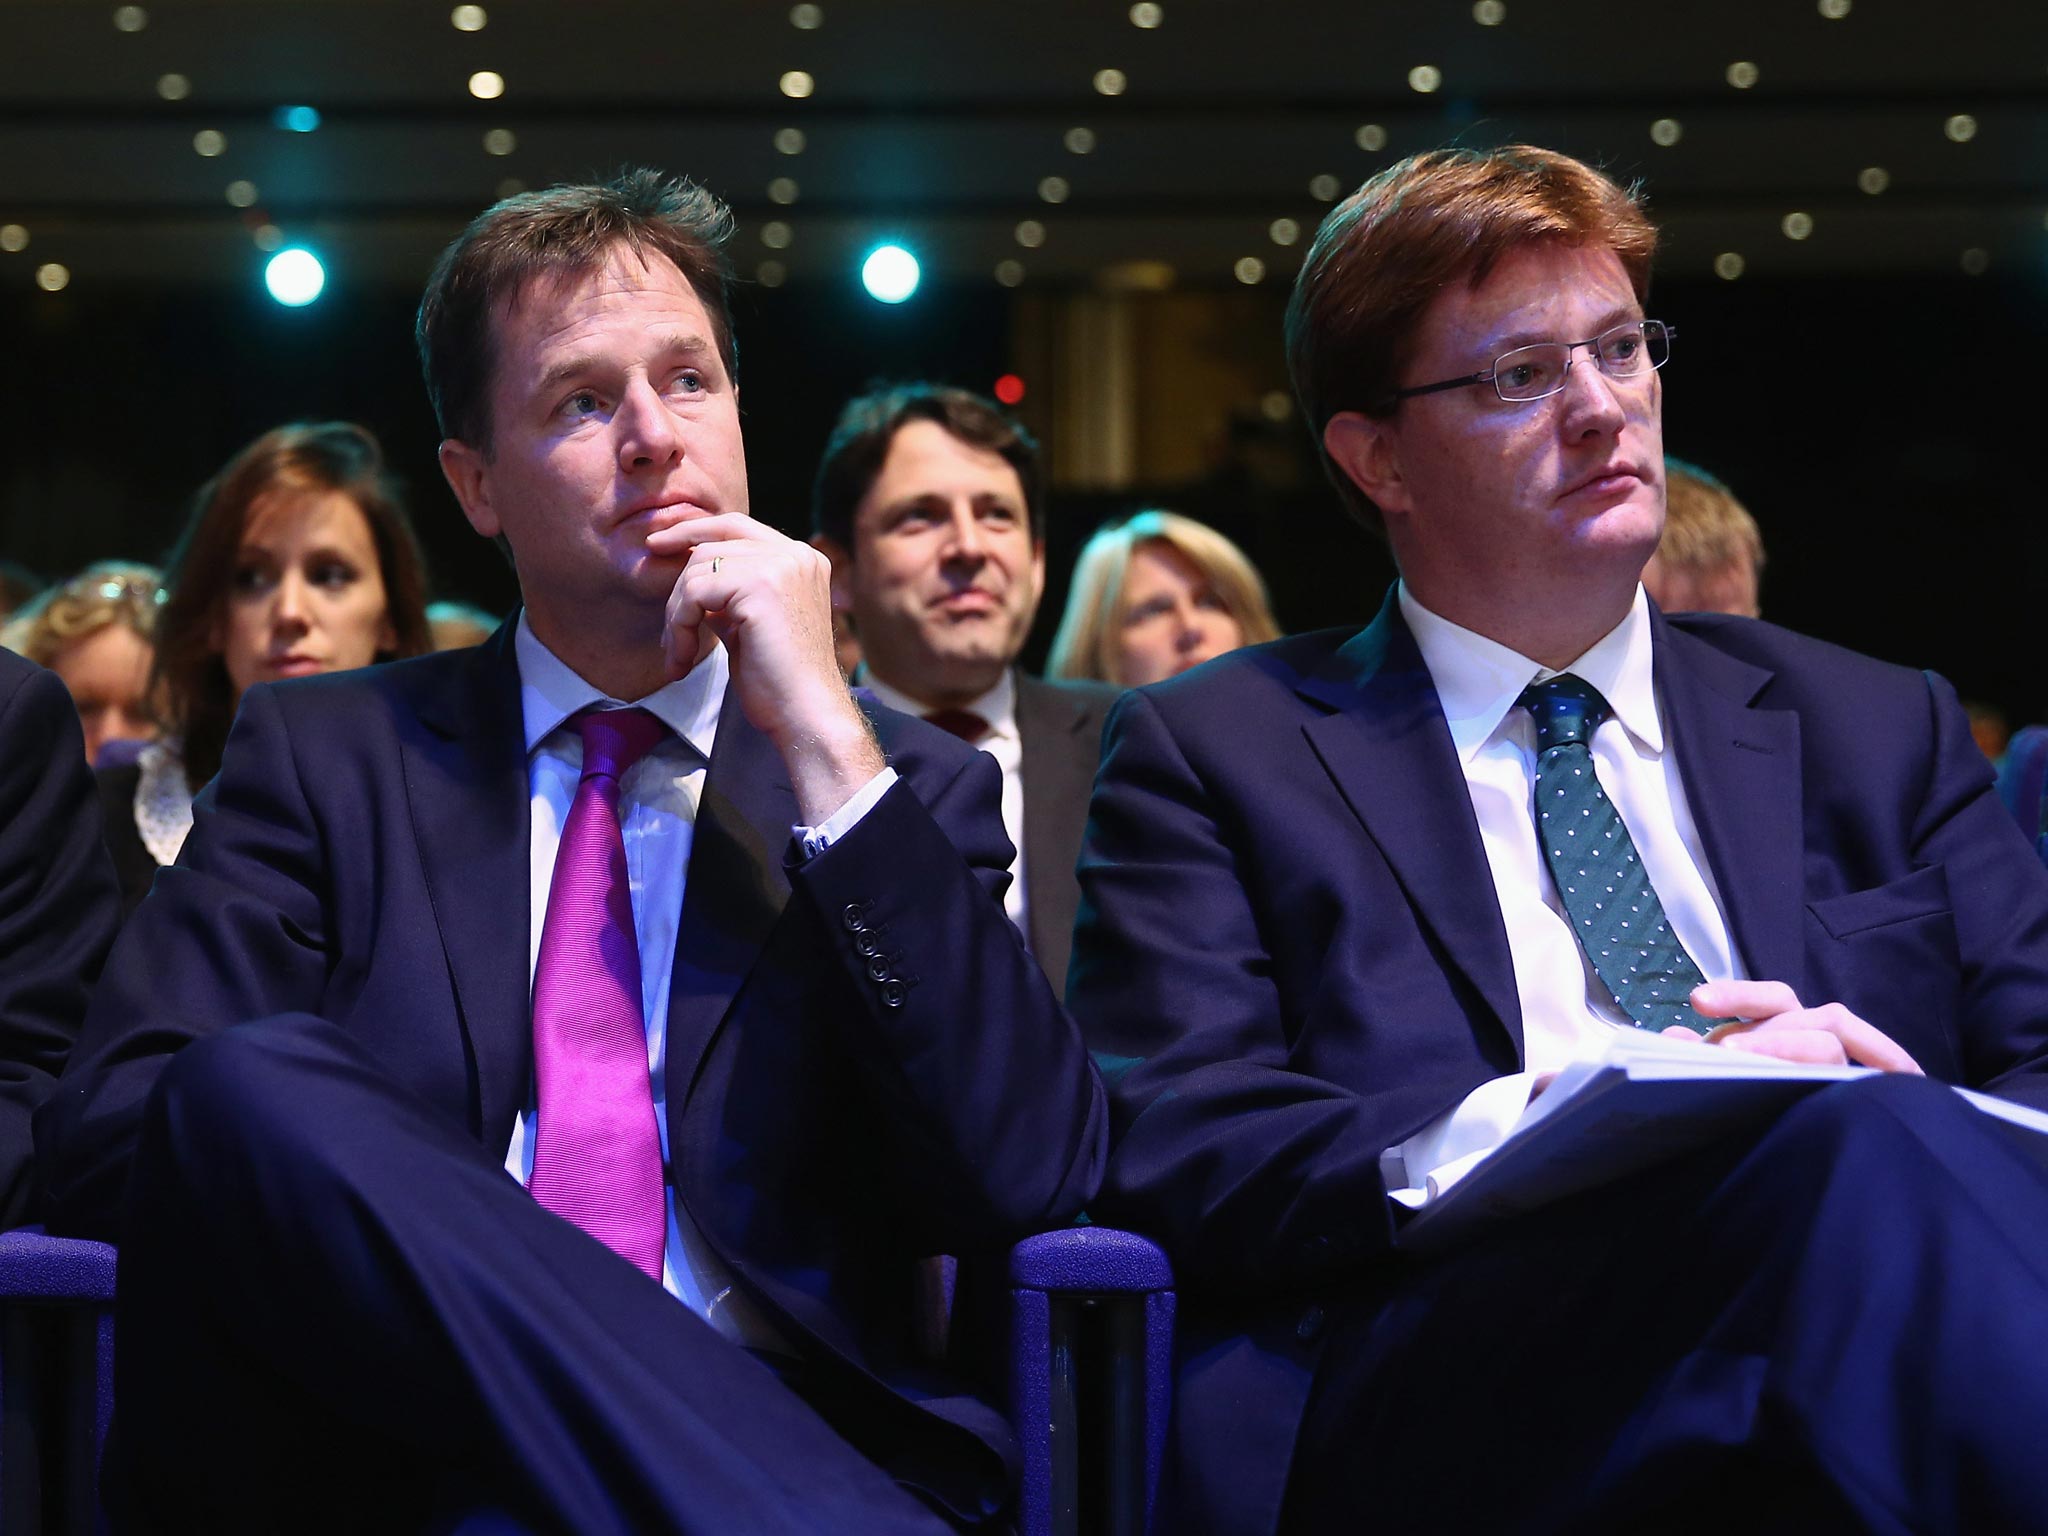 Nick Clegg and Danny Alexander believe they have the solution for dealing with thw deficit